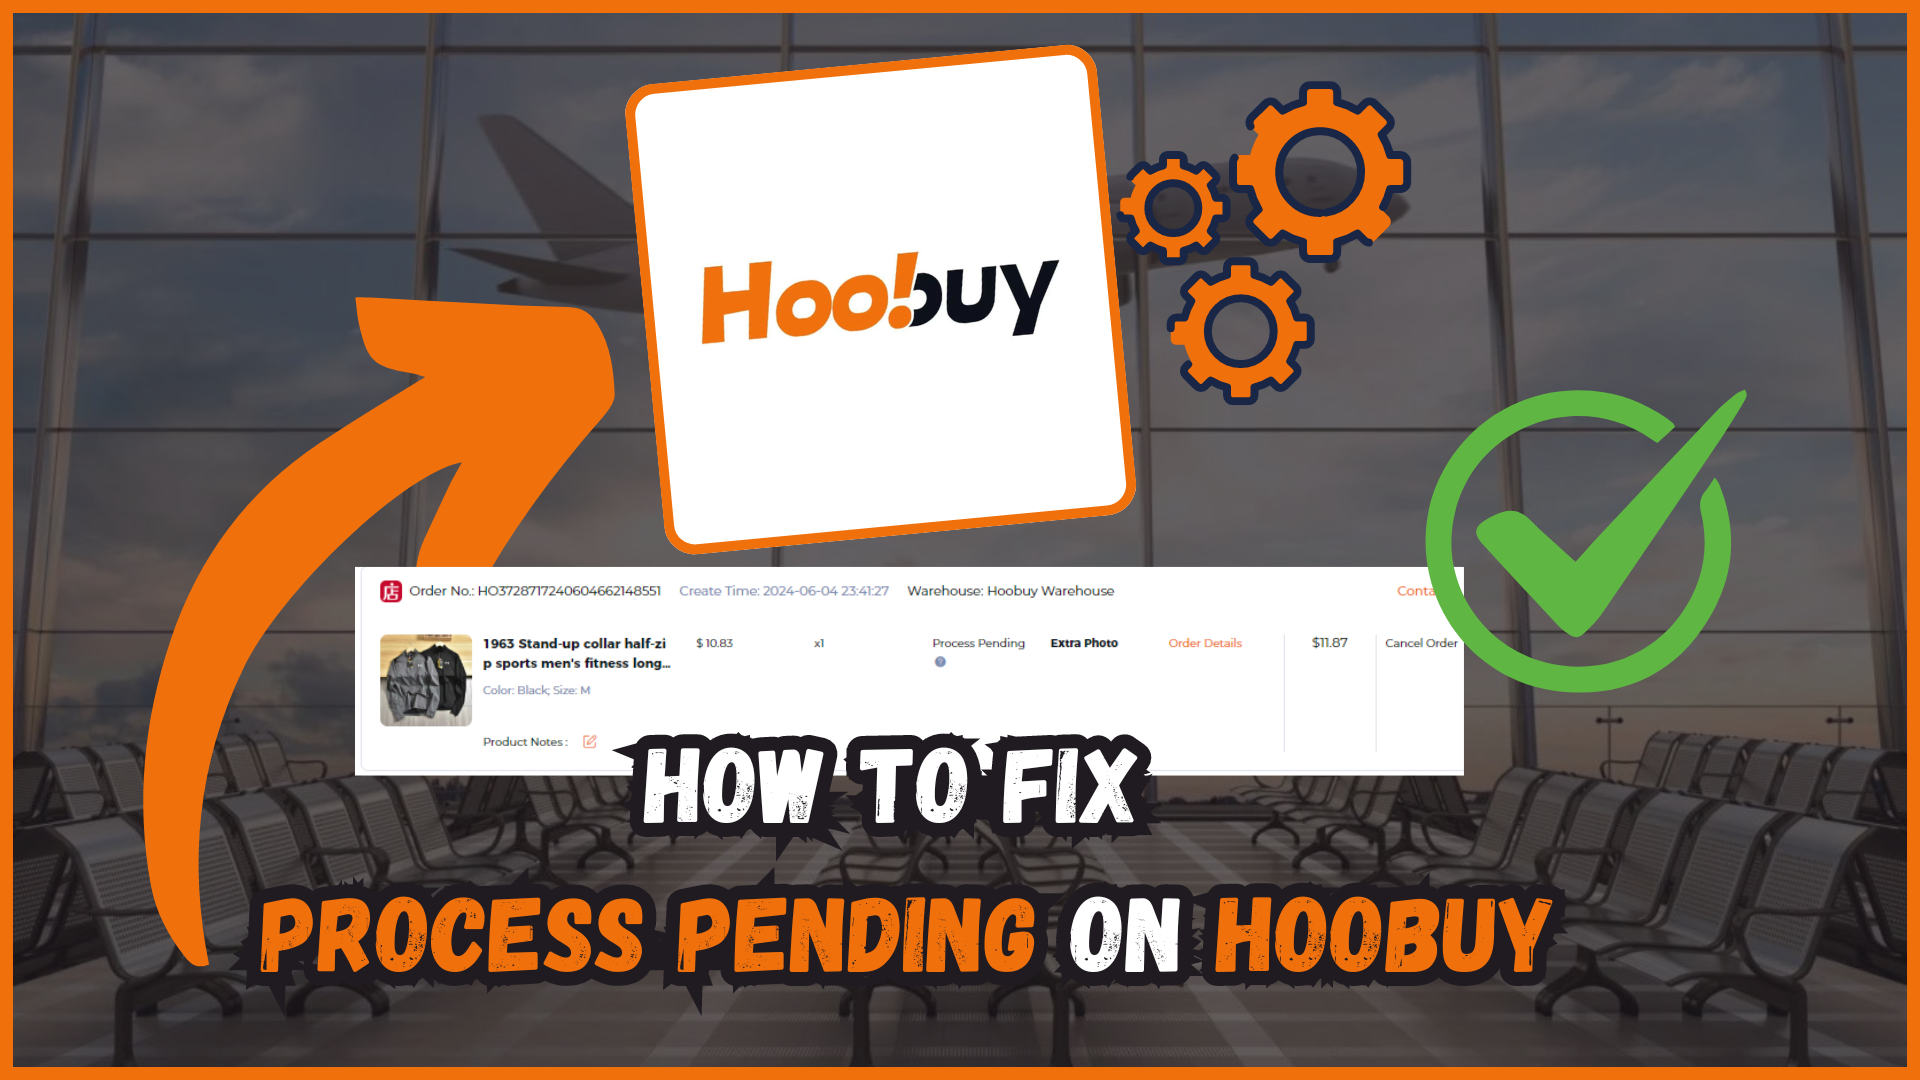 Article: How to Fix Process Pending HooBuy